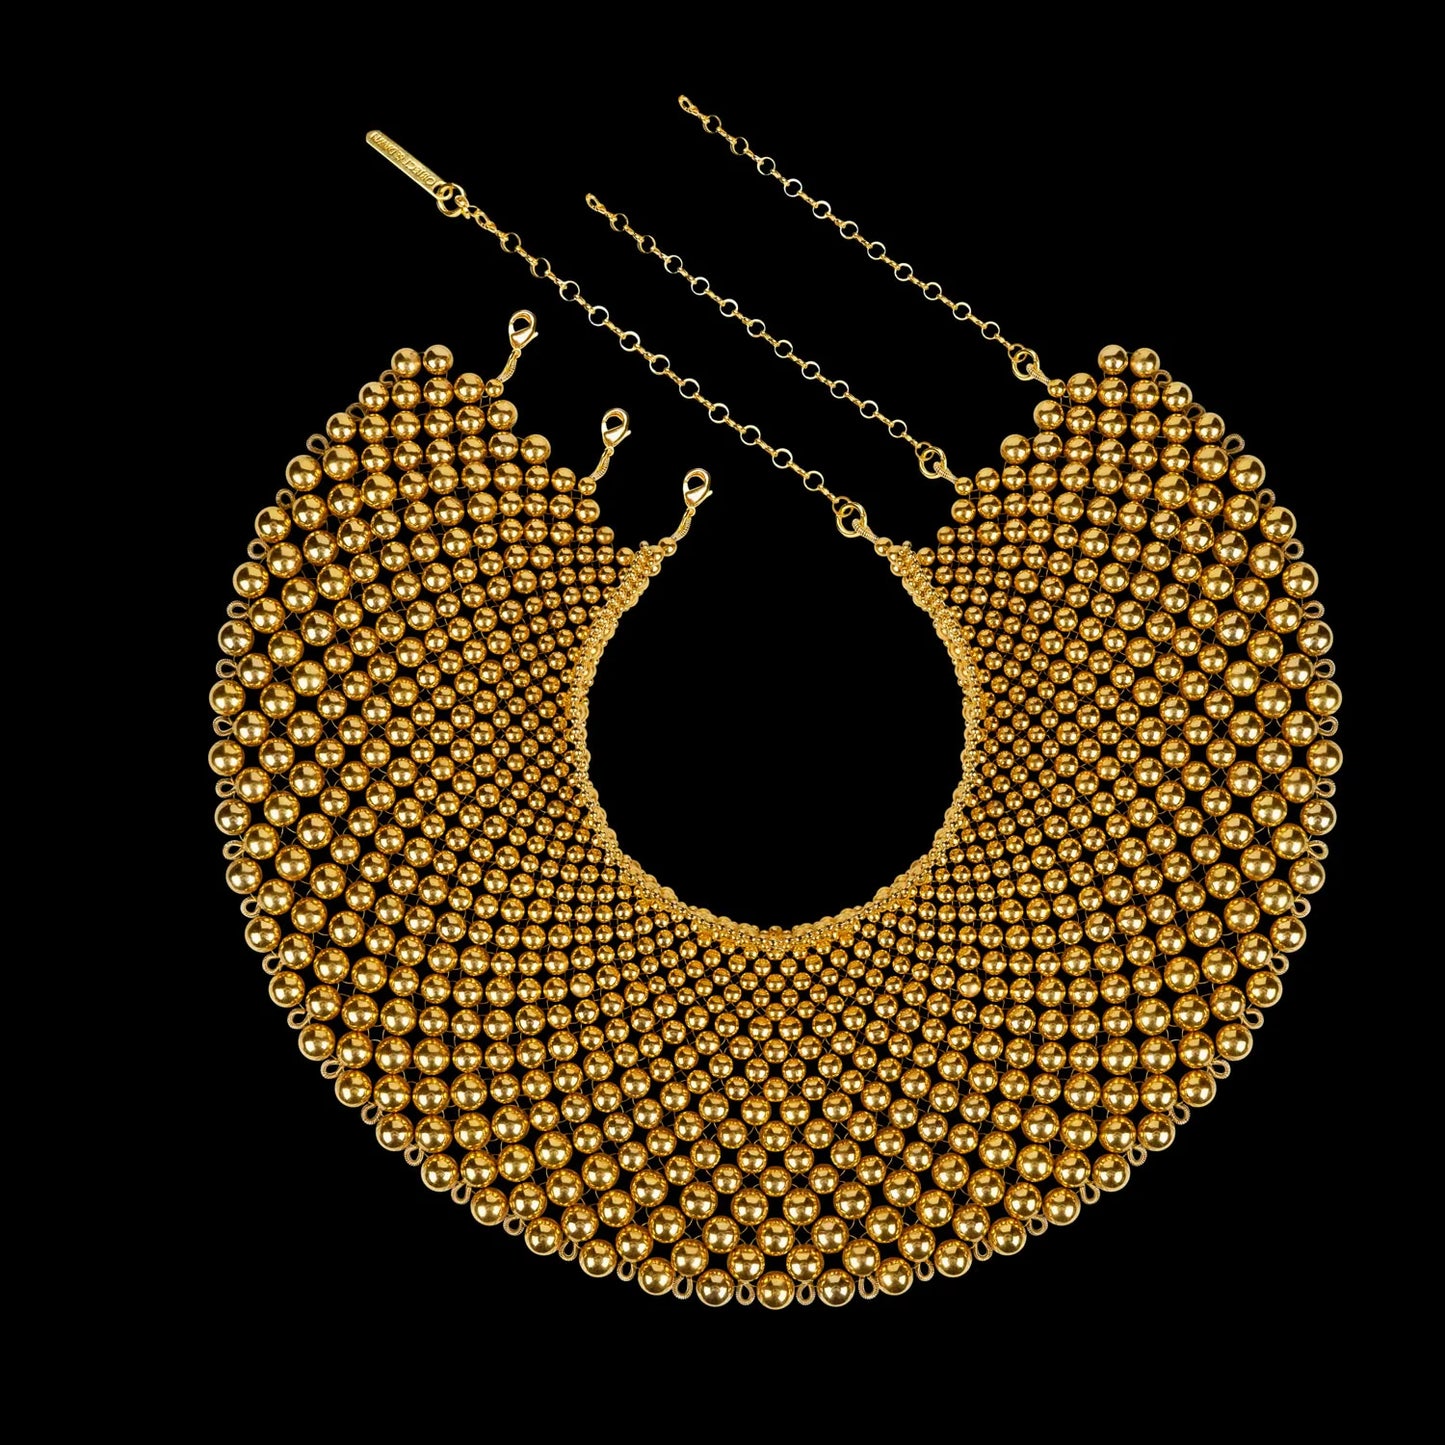 Gold Namaka modular necklace w/removable chain tassels